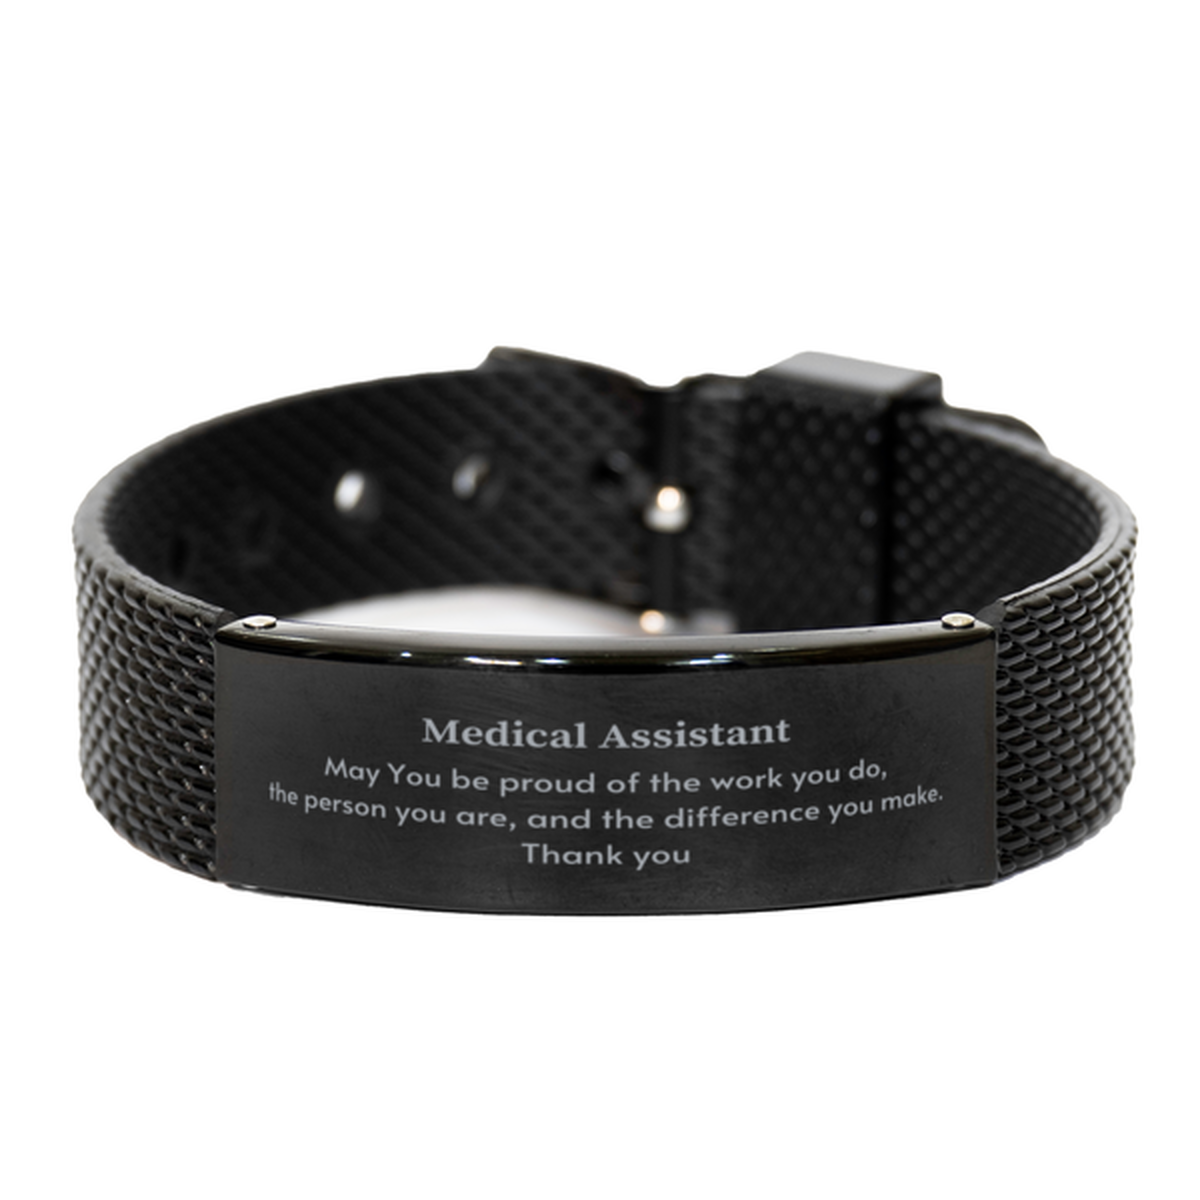 Heartwarming Black Shark Mesh Bracelet Retirement Coworkers Gifts for Medical Assistant, Medical Assistant May You be proud of the work you do, the person you are Gifts for Boss Men Women Friends